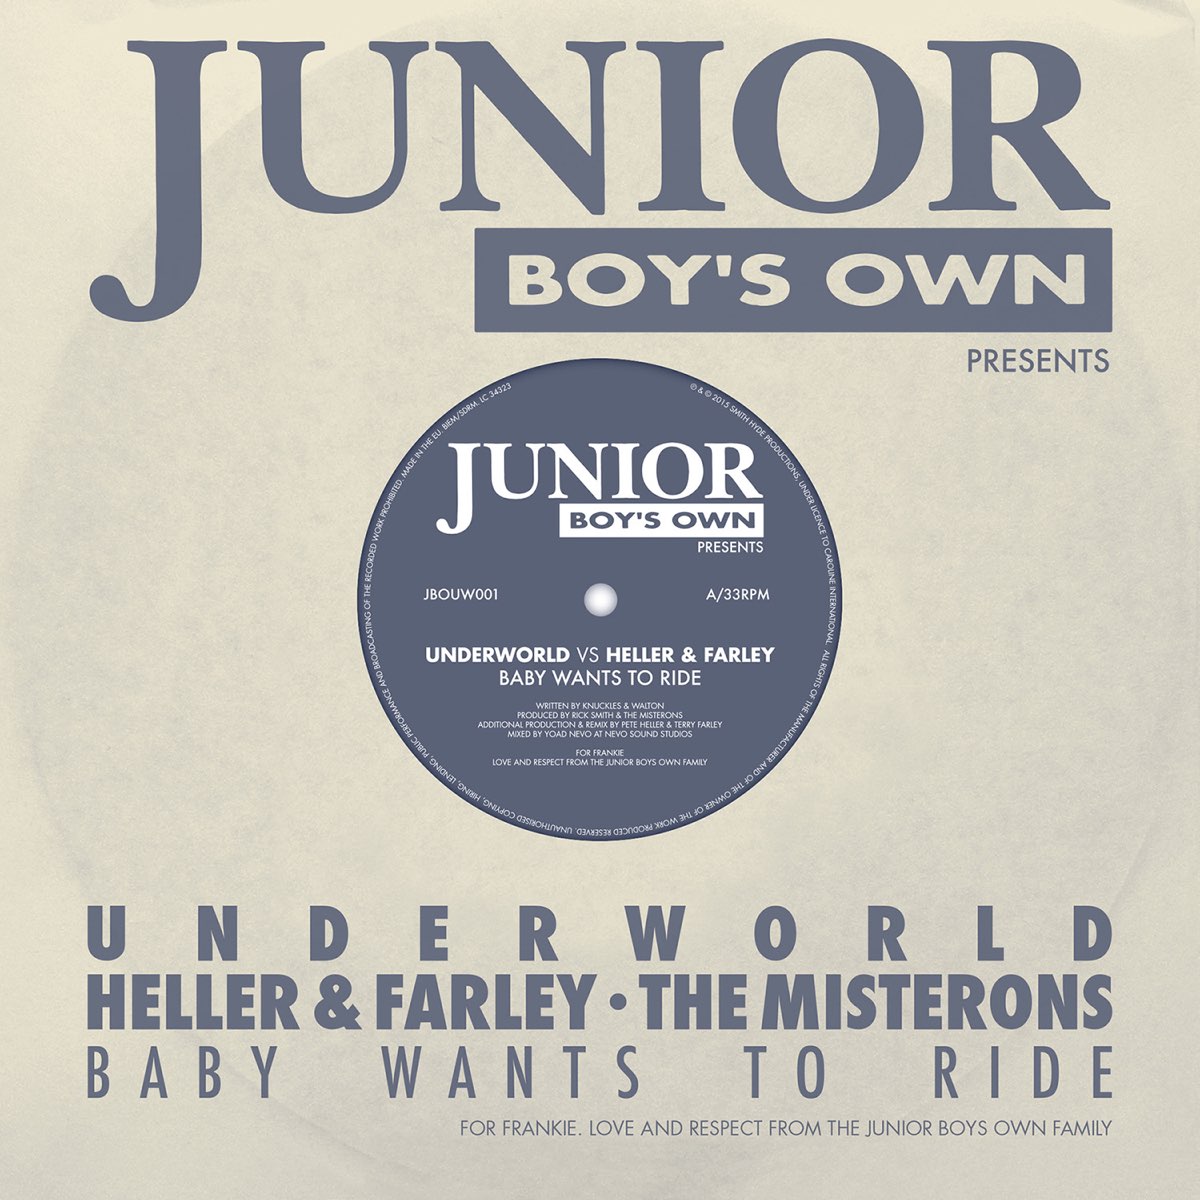 Own boy. Презент Джуниор. Terry Farley (boy's own). Frankie Knuckles – your Love / Baby wants to Ride.